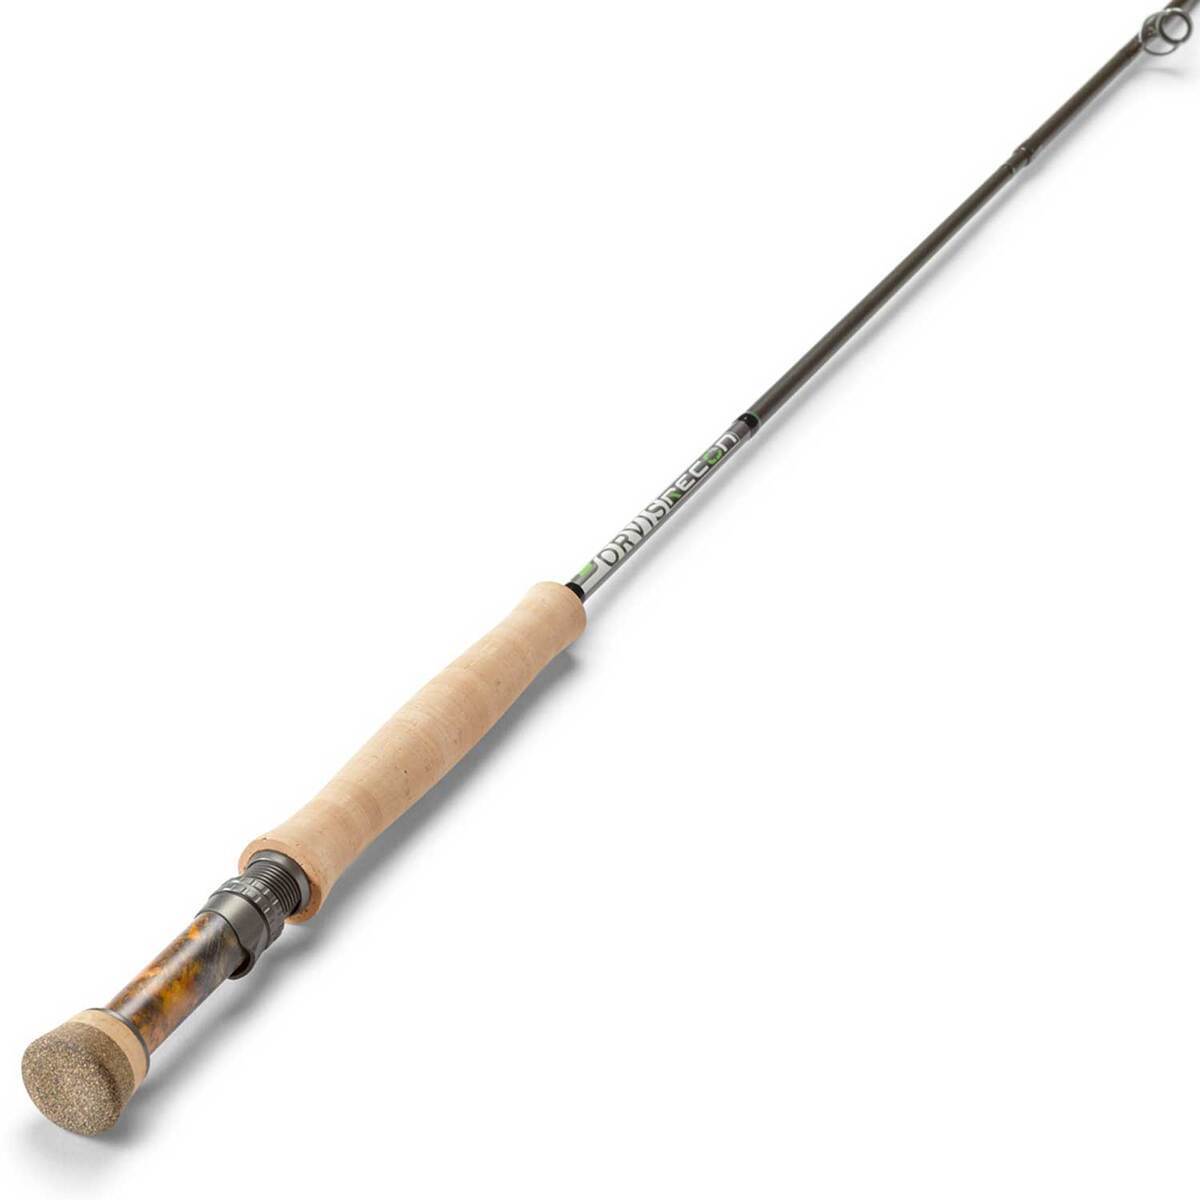 Orvis Recon Euro Nymph Fly Fishing Rod | Sportsman's Warehouse